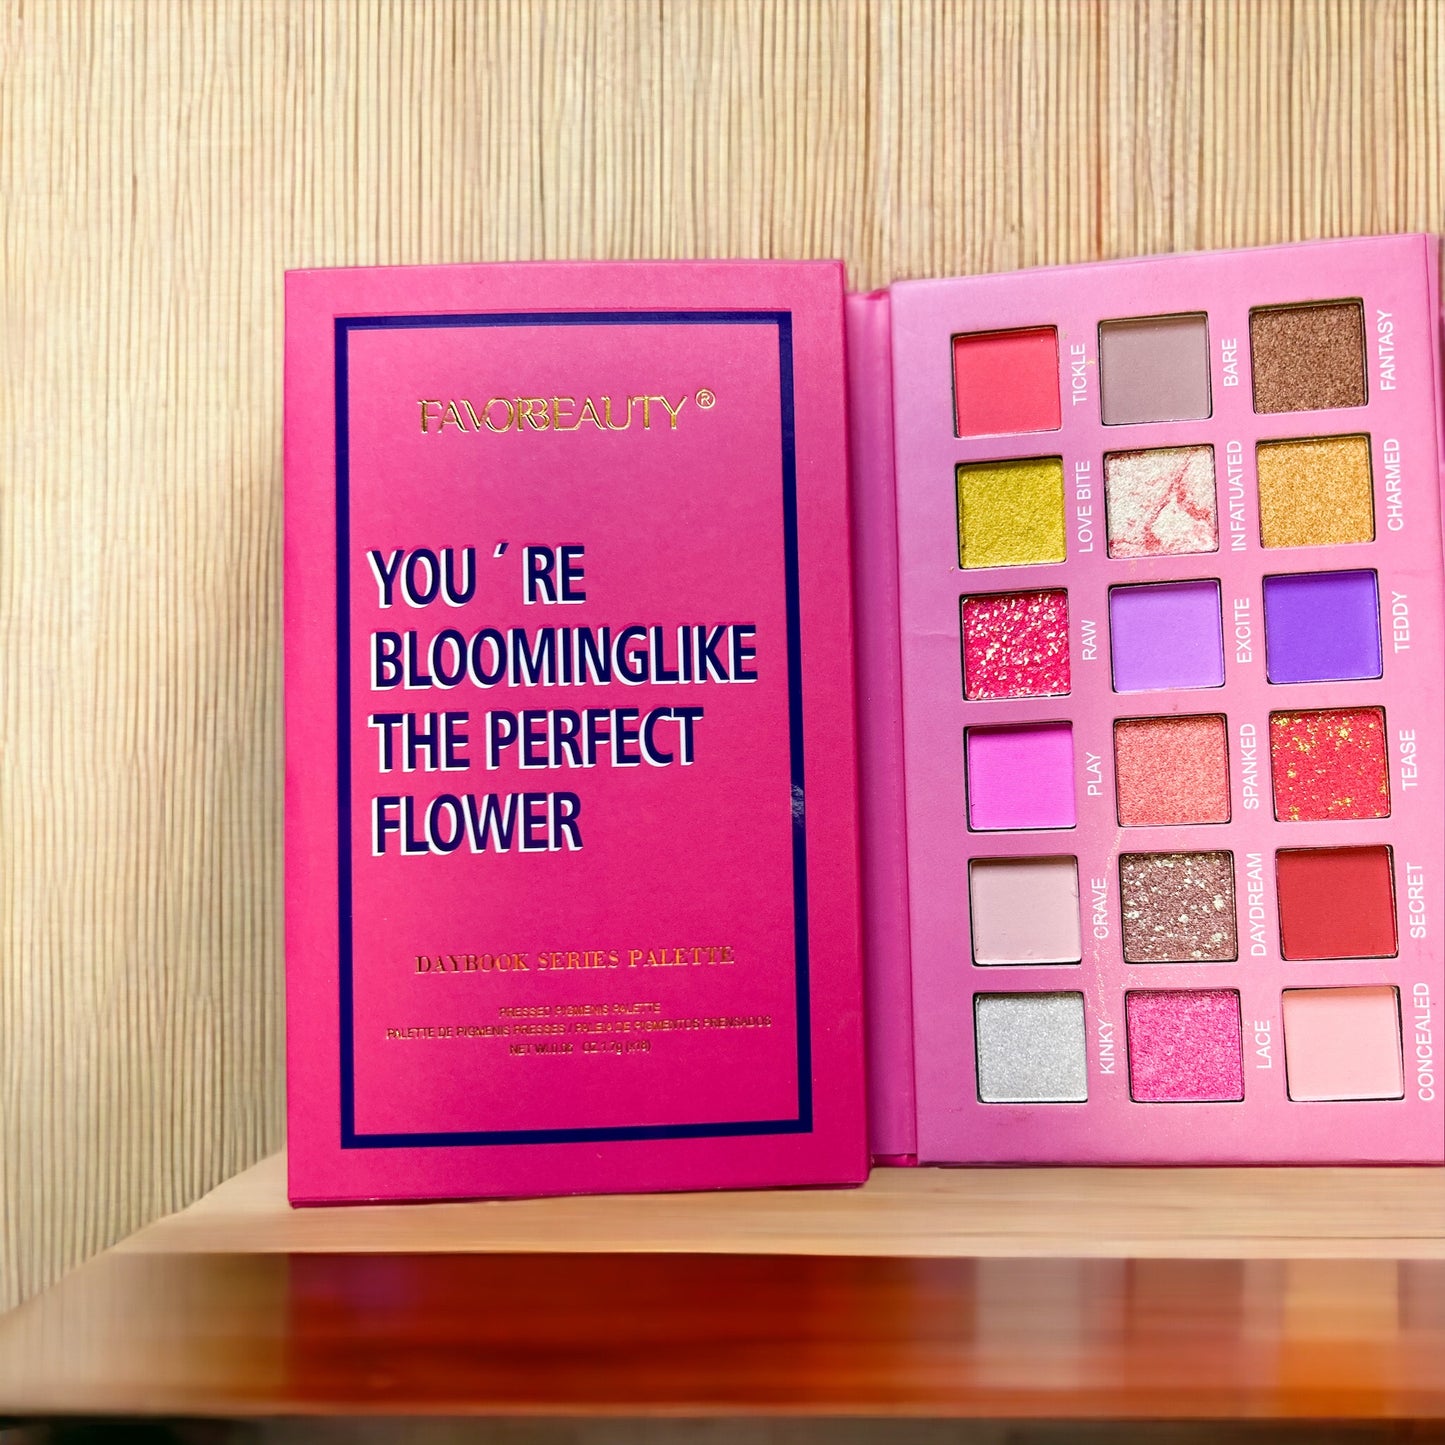 You’re Blooming - FavorBeauty